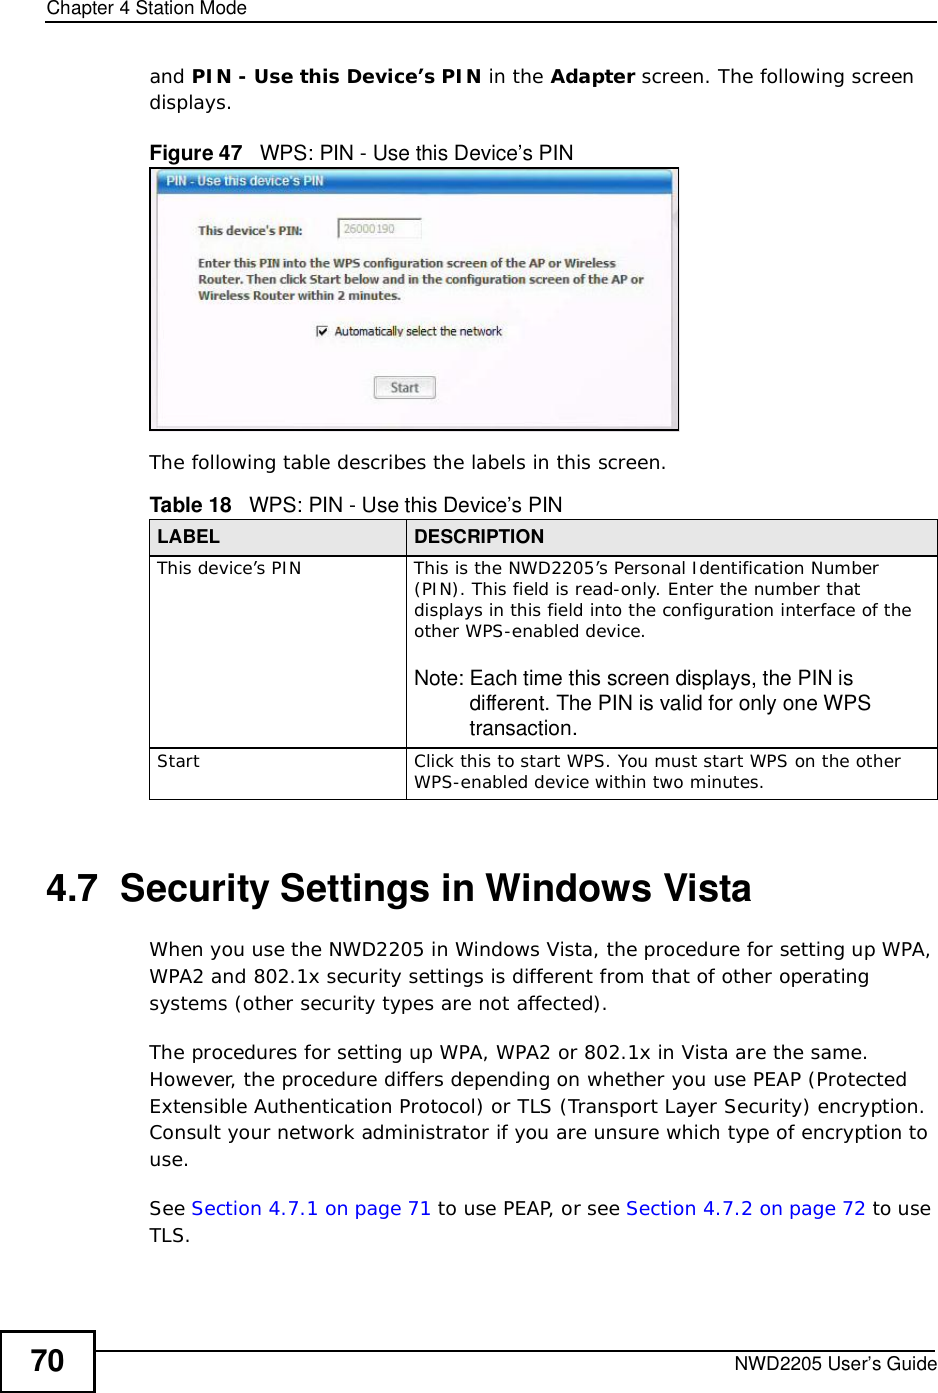 Chapter 4Station ModeNWD2205 User’s Guide70and PIN - Use this Device’s PIN in the Adapter screen. The following screen displays.Figure 47   WPS: PIN - Use this Device’s PINThe following table describes the labels in this screen.    4.7  Security Settings in Windows Vista When you use the NWD2205 in Windows Vista, the procedure for setting up WPA, WPA2 and 802.1x security settings is different from that of other operating systems (other security types are not affected).The procedures for setting up WPA, WPA2 or 802.1x in Vista are the same. However, the procedure differs depending on whether you use PEAP (Protected Extensible Authentication Protocol) or TLS (Transport Layer Security) encryption. Consult your network administrator if you are unsure which type of encryption to use.See Section 4.7.1 on page 71 to use PEAP, or see Section 4.7.2 on page 72 to use TLS.Table 18   WPS: PIN - Use this Device’s PINLABEL DESCRIPTIONThis device’s PINThis is the NWD2205’s Personal Identification Number (PIN). This field is read-only. Enter the number that displays in this field into the configuration interface of the other WPS-enabled device.Note: Each time this screen displays, the PIN is different. The PIN is valid for only one WPS transaction.StartClick this to start WPS. You must start WPS on the other WPS-enabled device within two minutes.